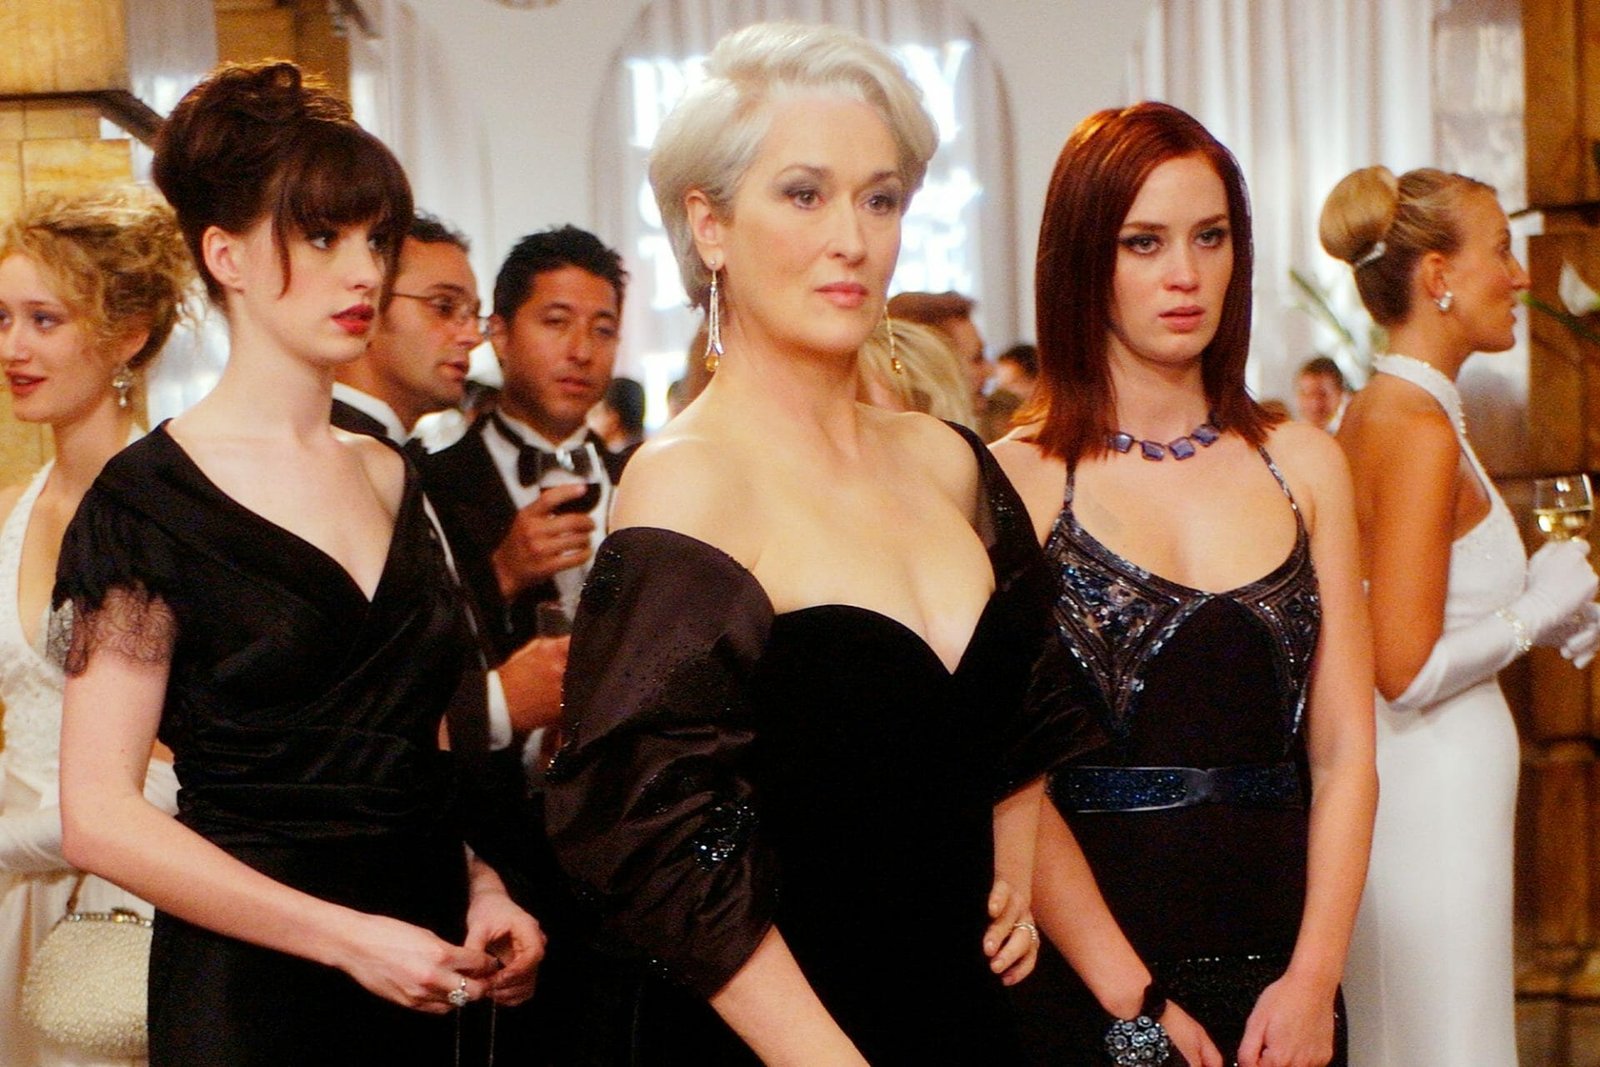 Movies about rich people: The Devil Wears Prada